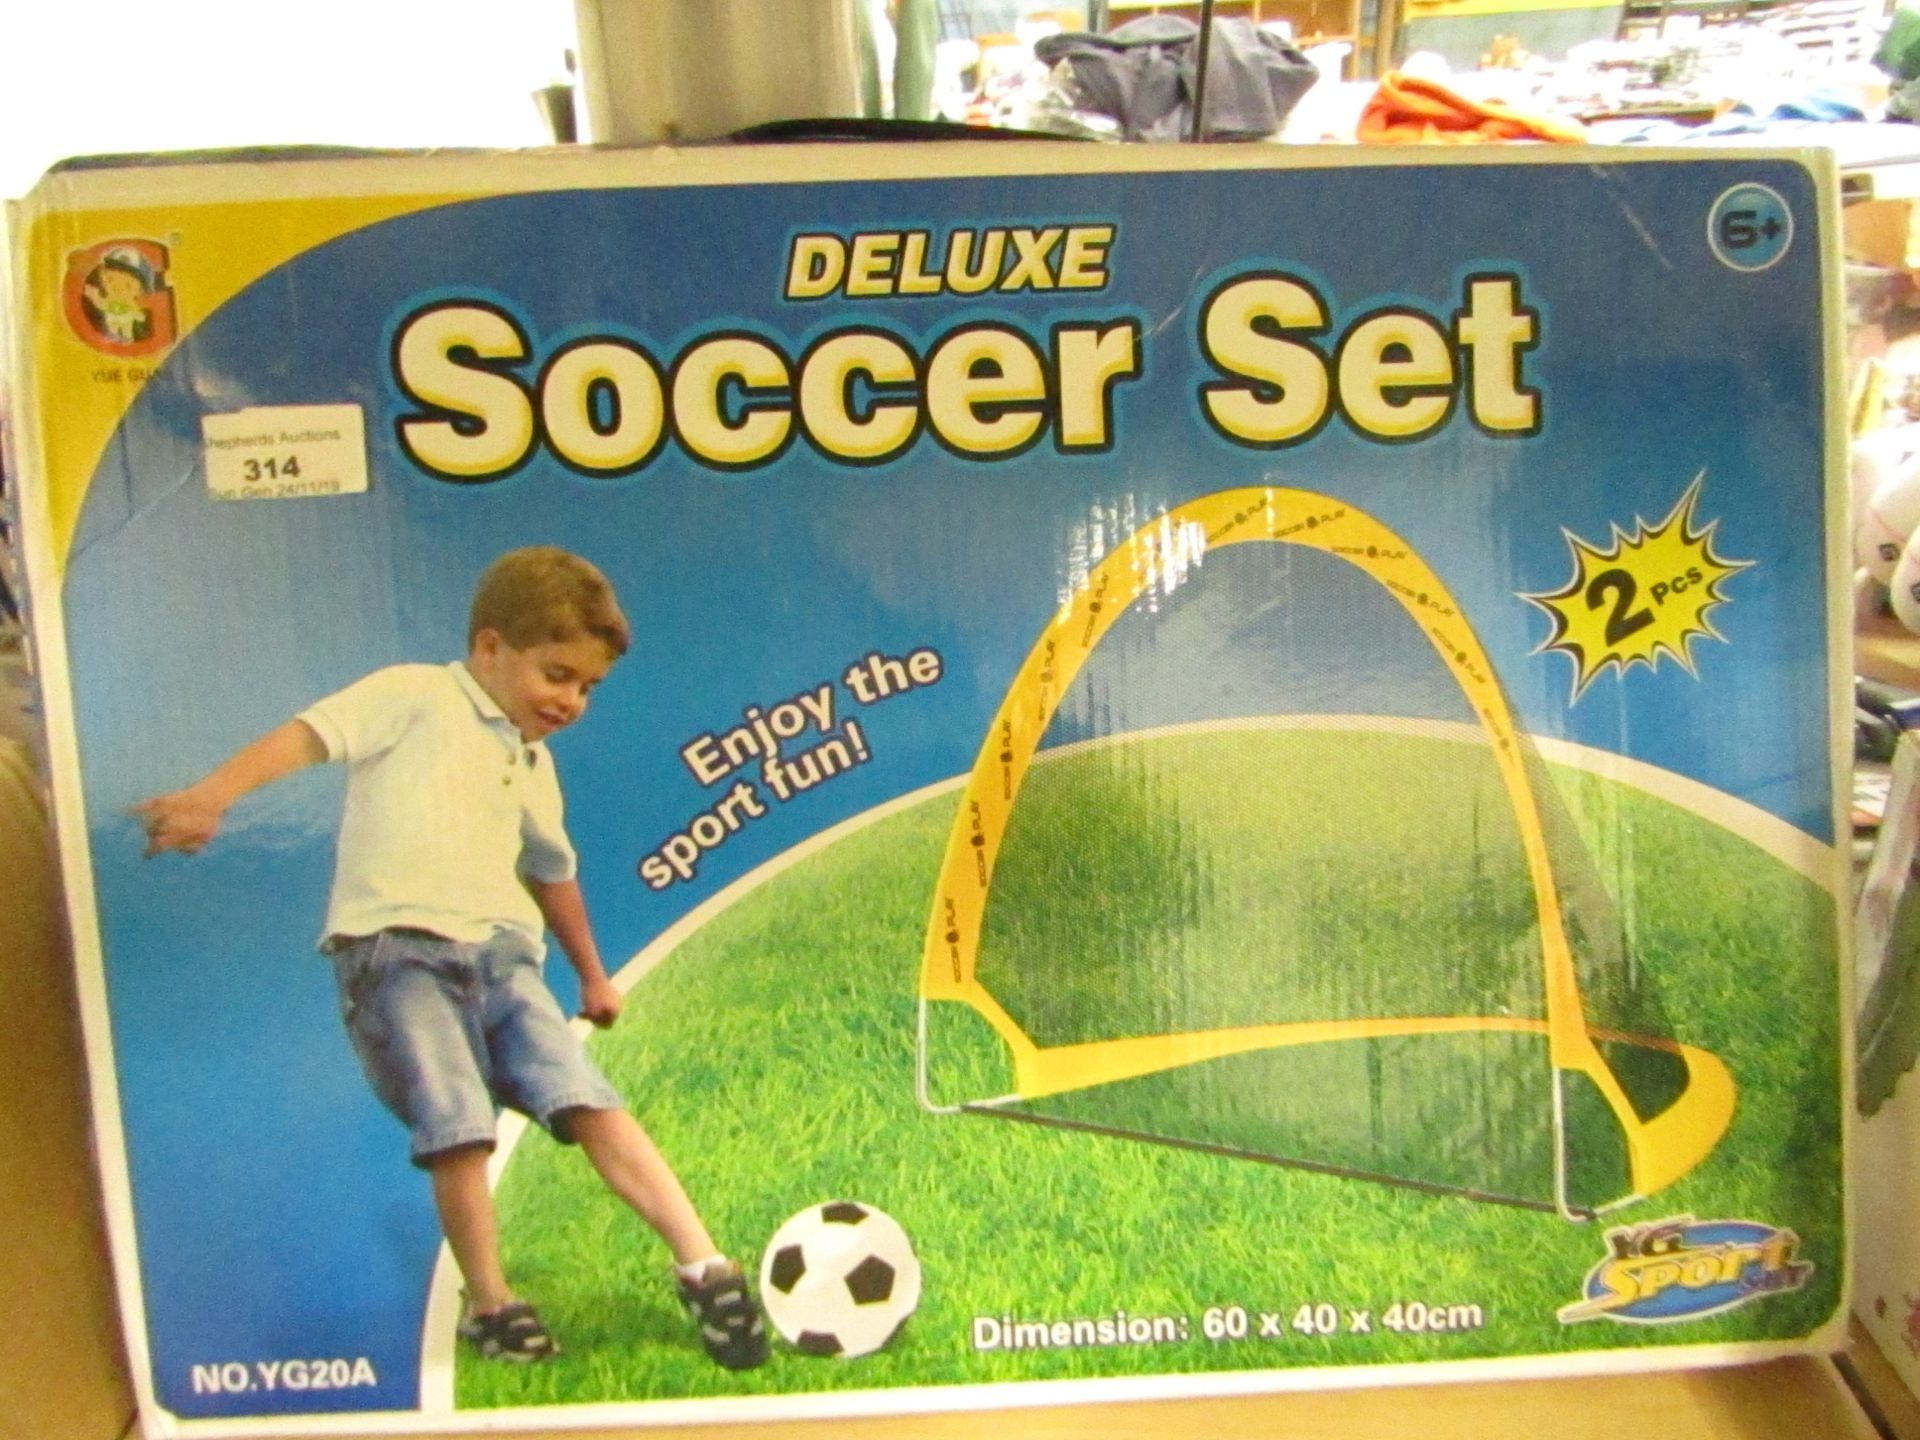 Deluxe Soccer Set. Boxed but unchecked